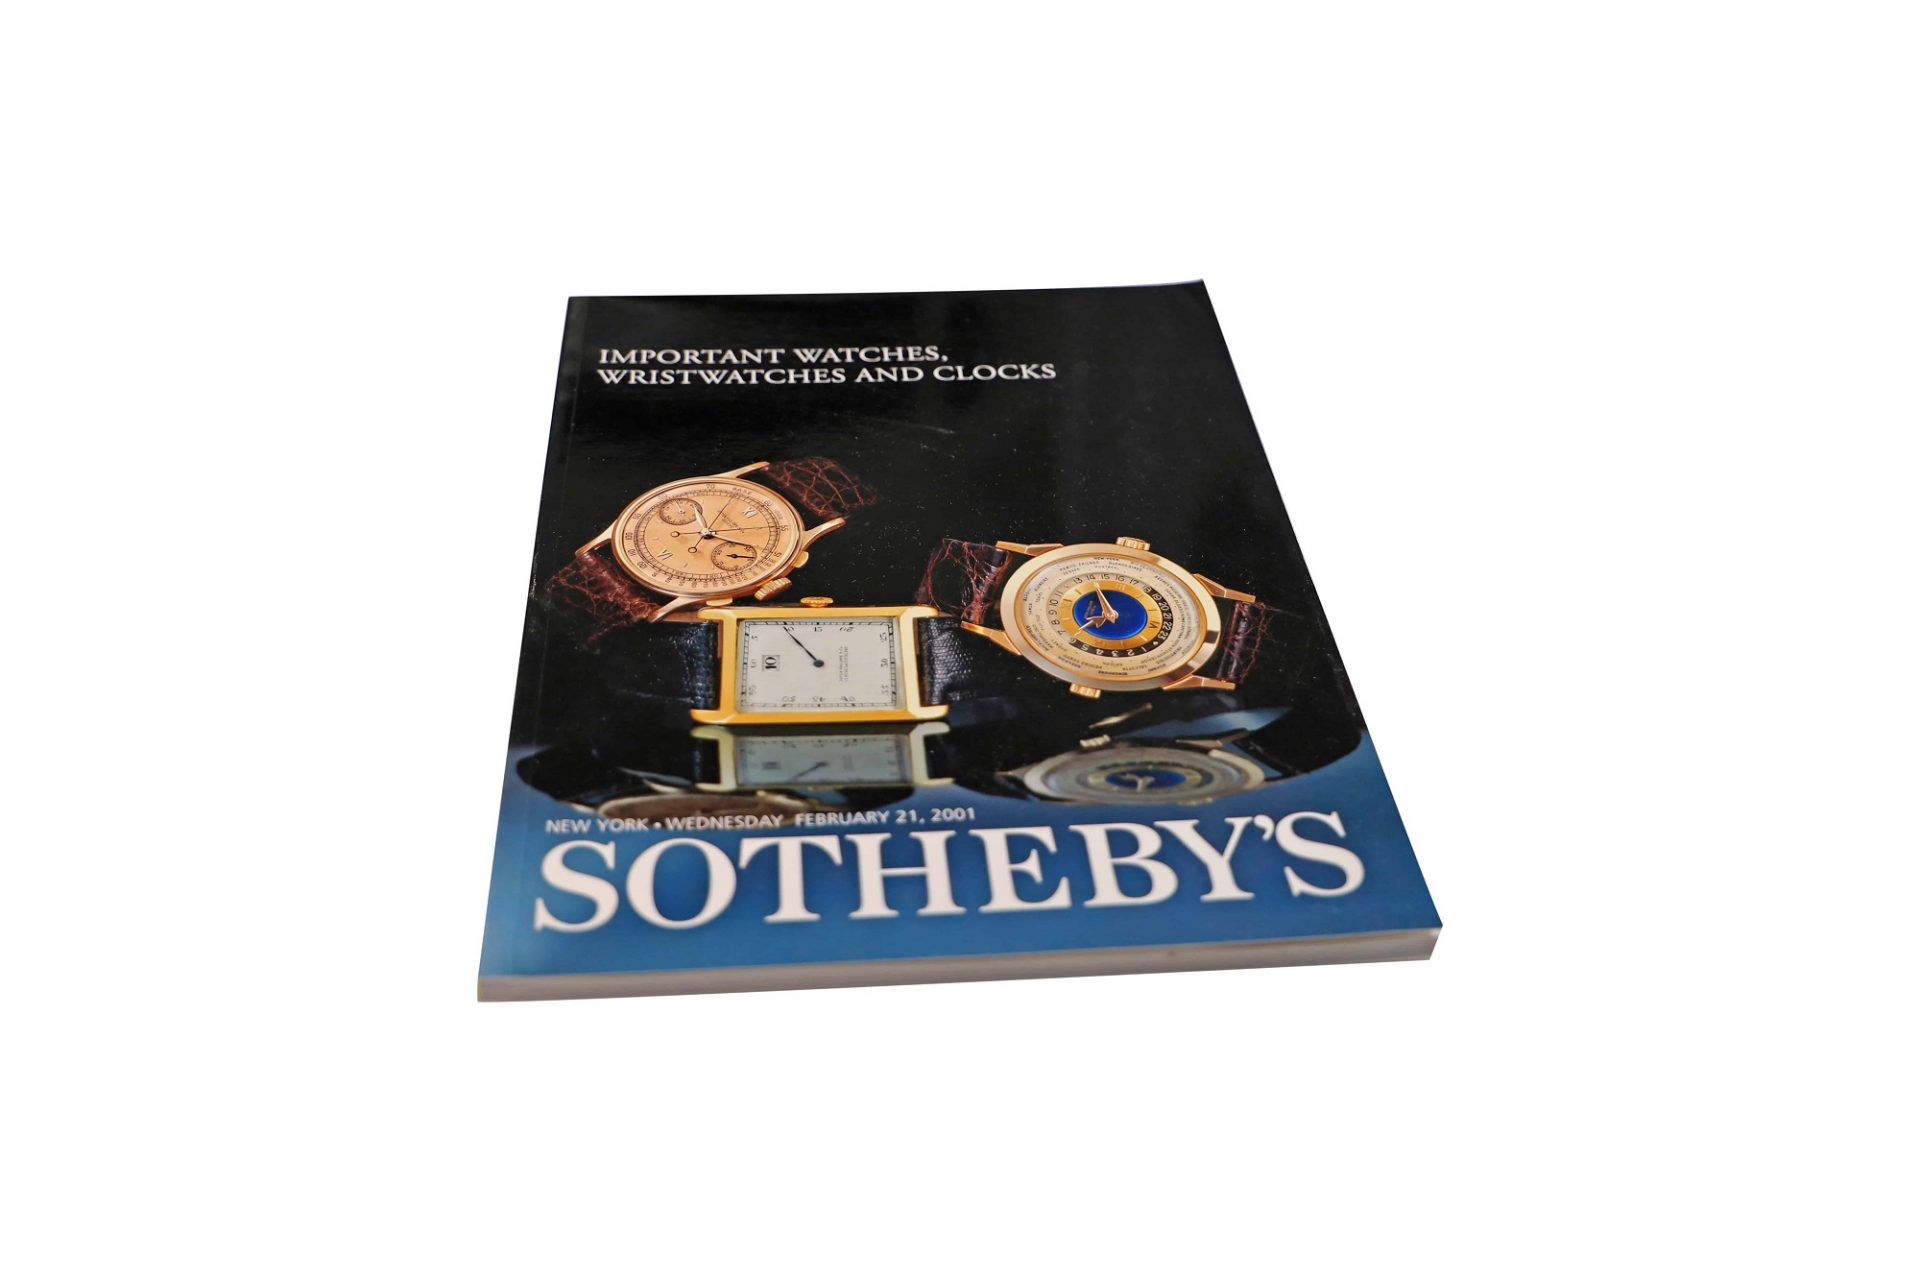 Sotheby's Important Watches, Wristwatches And Clock New York February 21, 2001 Auction Catalog - Rare Watch Parts